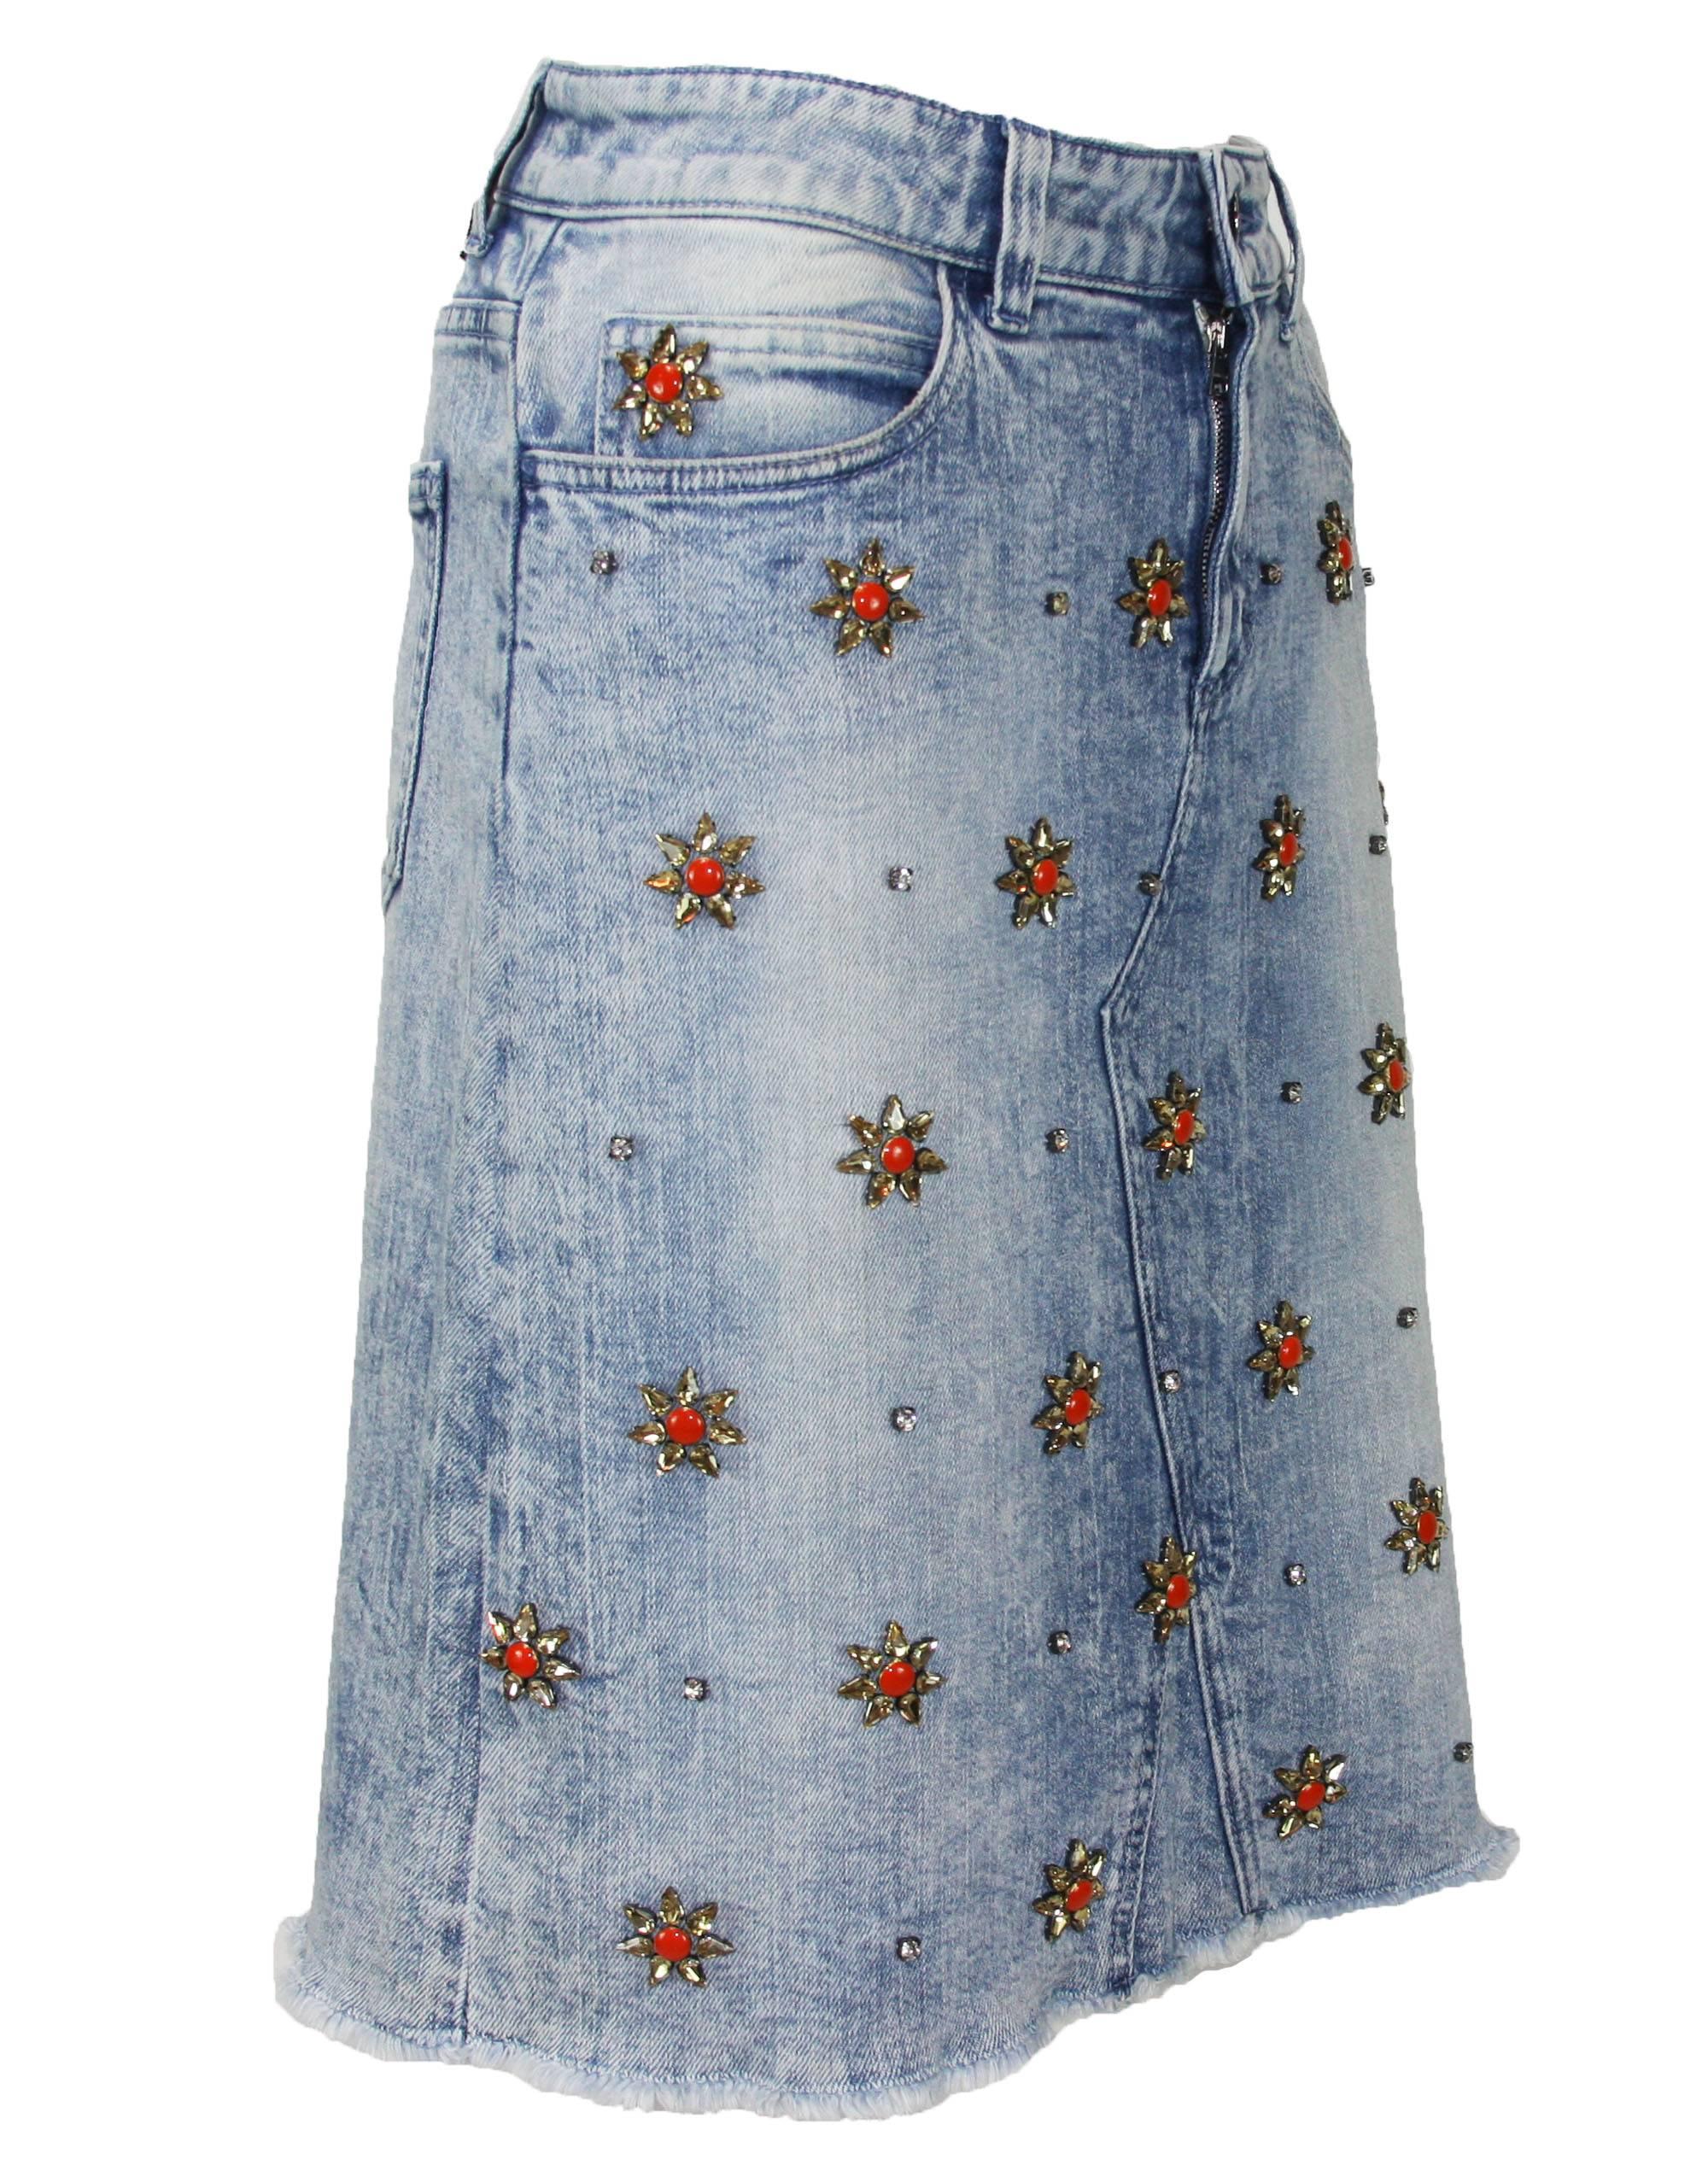 New GUCCI Crystal-Embellished Stretch Denim Skirt

Gucci has Recreated a Popular Denim Skirt that was Designed by Tom Ford in 1999.
Orange and Yellow Flower shape Crystal-Embellished
Bleach washed stretch denim
98% Cotton, 2% Elastane
Gucci Embossed